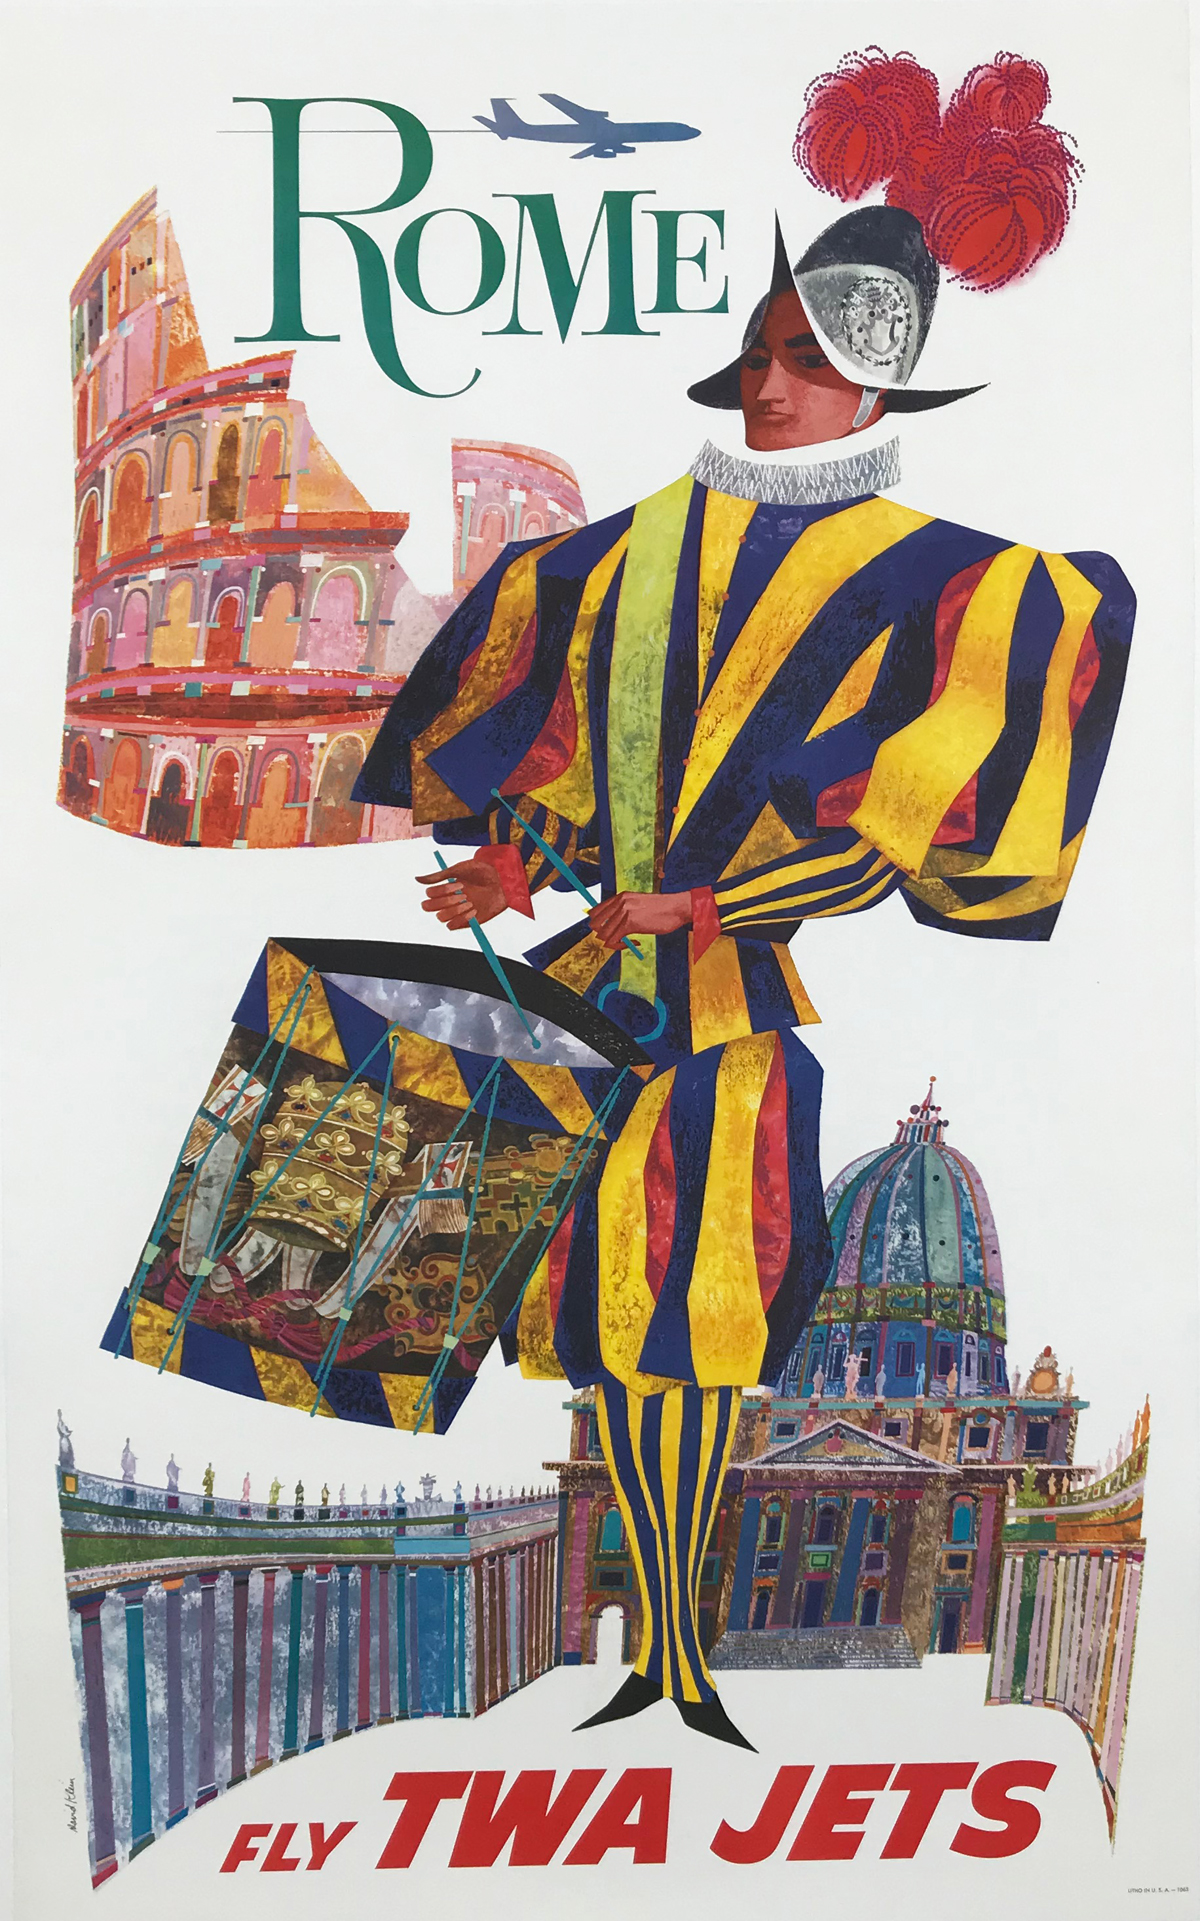 Rome Fly TWA Jets by David Klein Original 1960 Vintage American Passenger Plane Travel Advertisement Lithograph Poster Linen Backed. Shows a man playing on the drum behind him is a colosseum and St. Peter's Square.